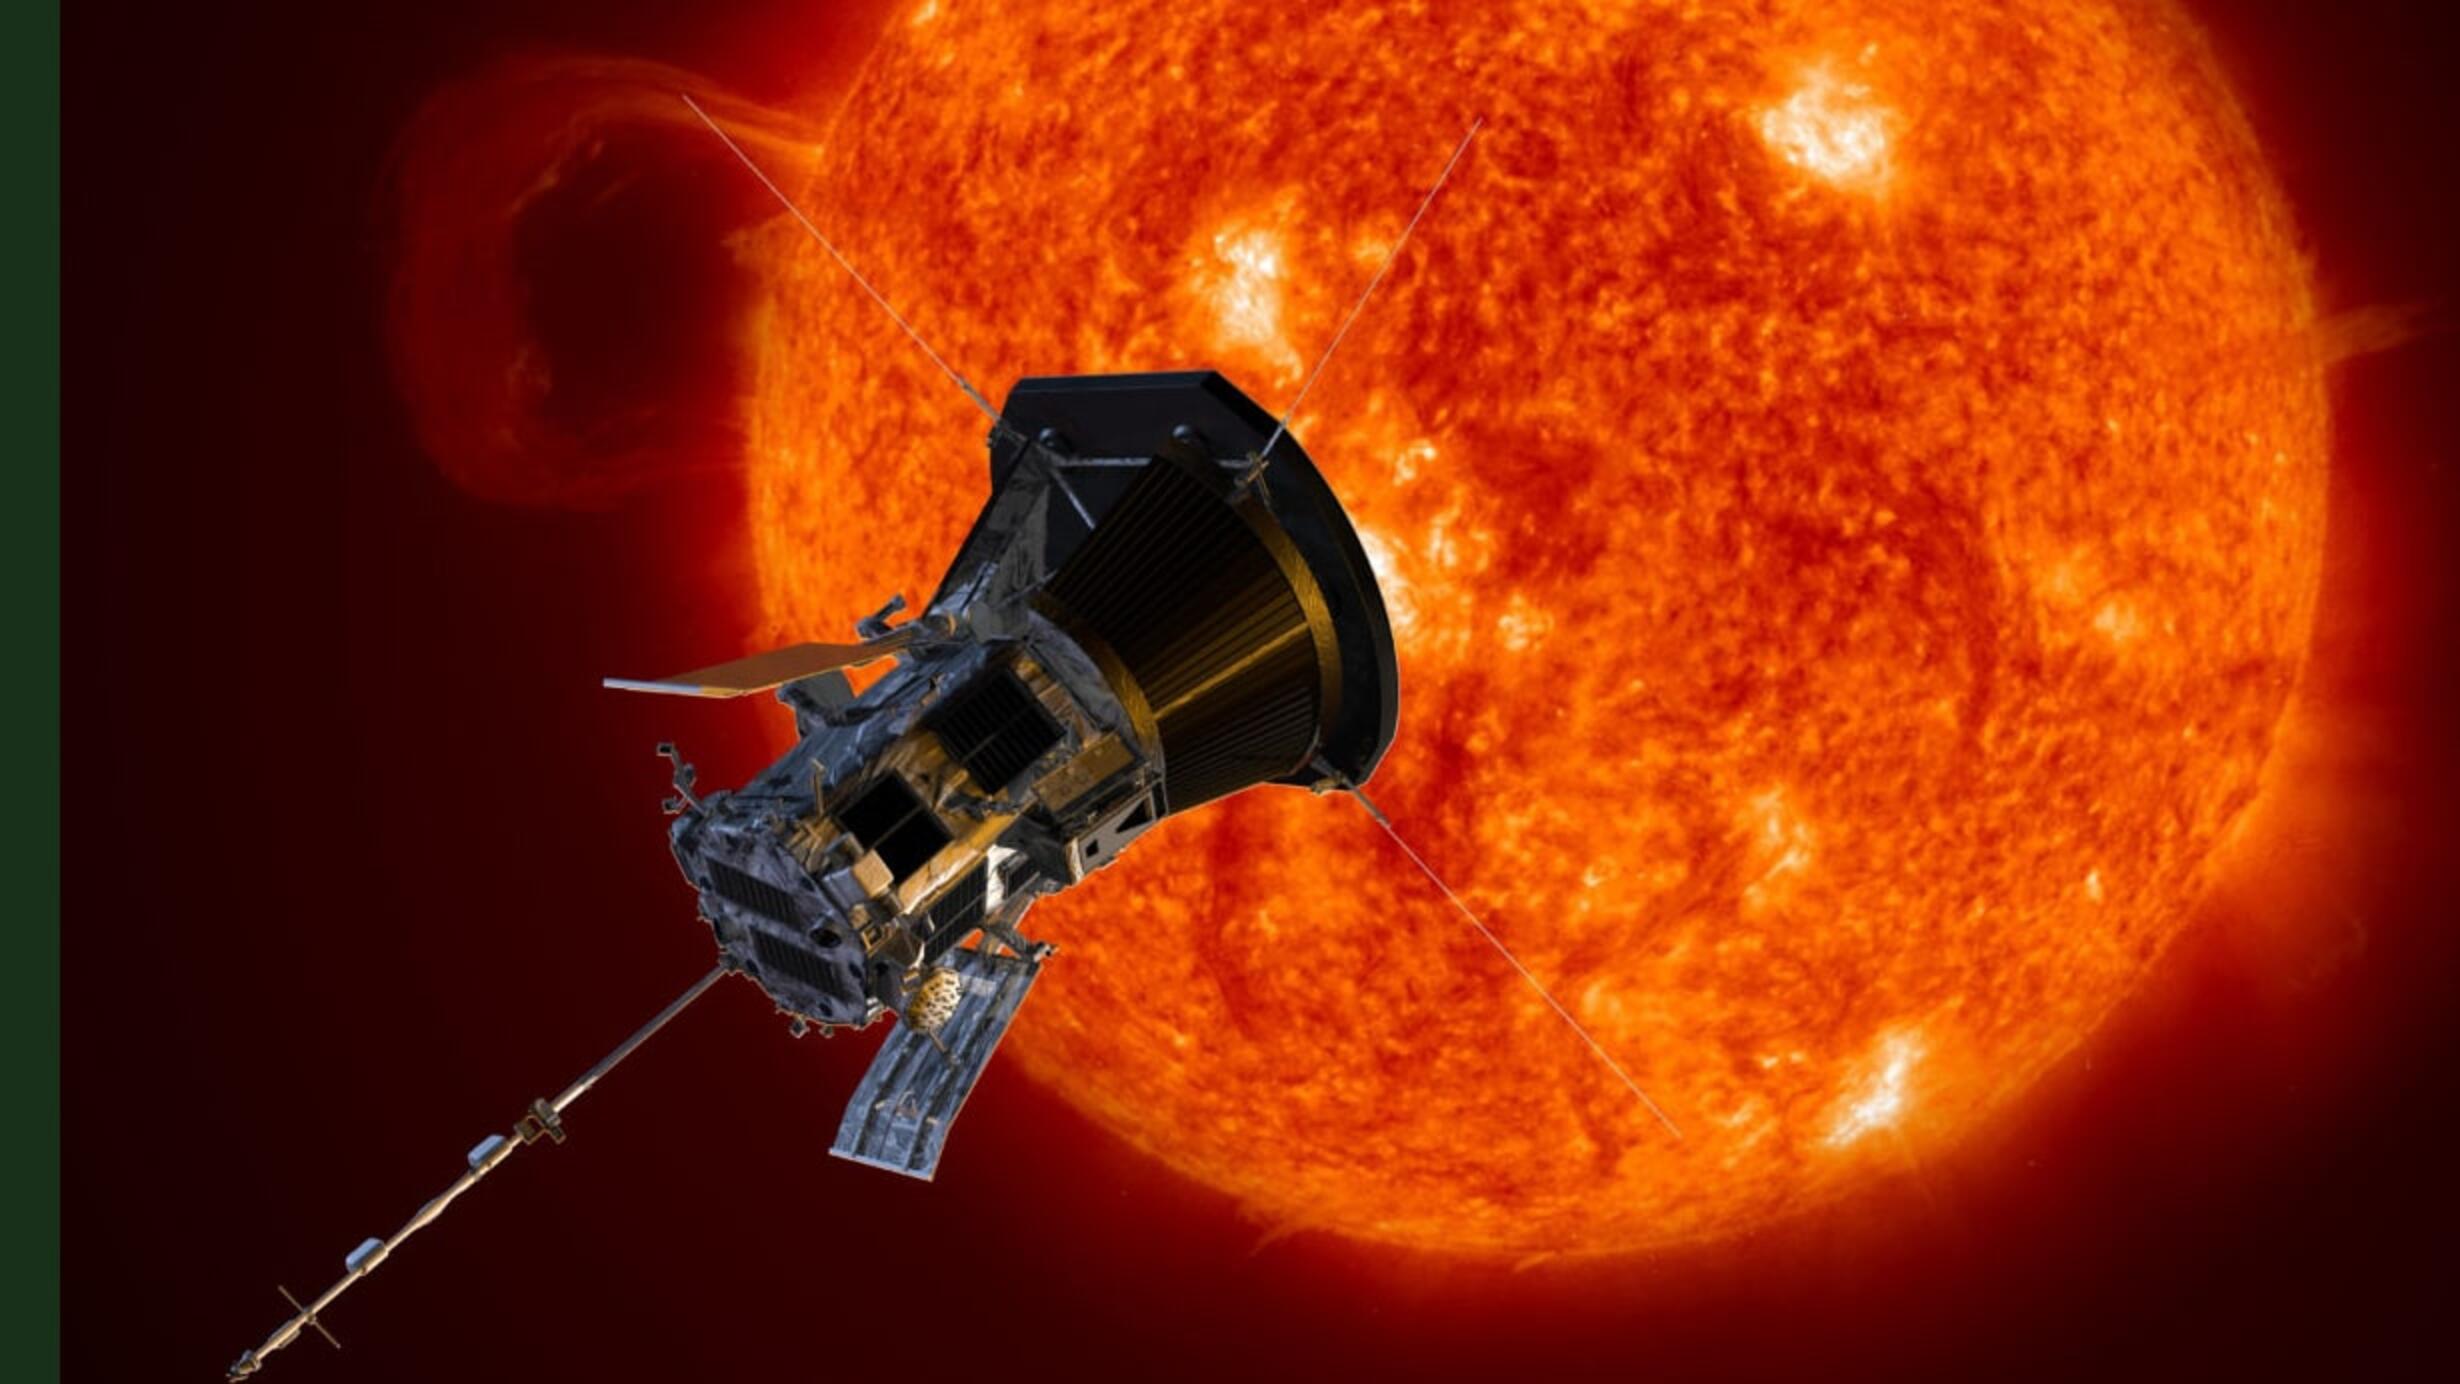 An artist rendition of NASA’s Parker Solar Probe. The spacecraft appears with the Sun depicted as a bright, flaming orb in the background.